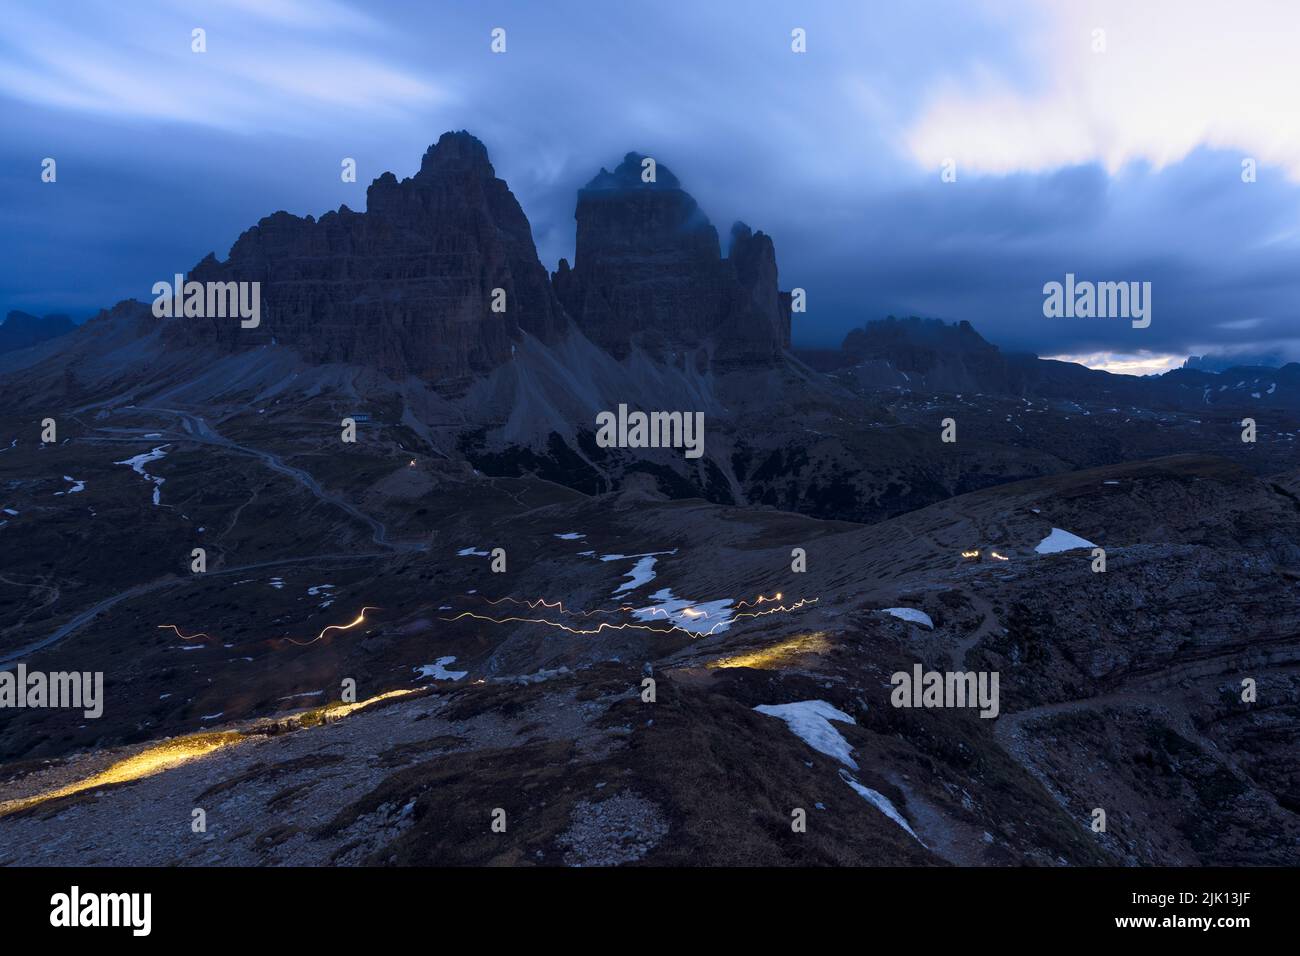 Clouds at dusk in the foggy sky over the majestic rocks of Tre Cime di Lavaredo, Dolomites, South Tyrol, Italy, Europe Stock Photo